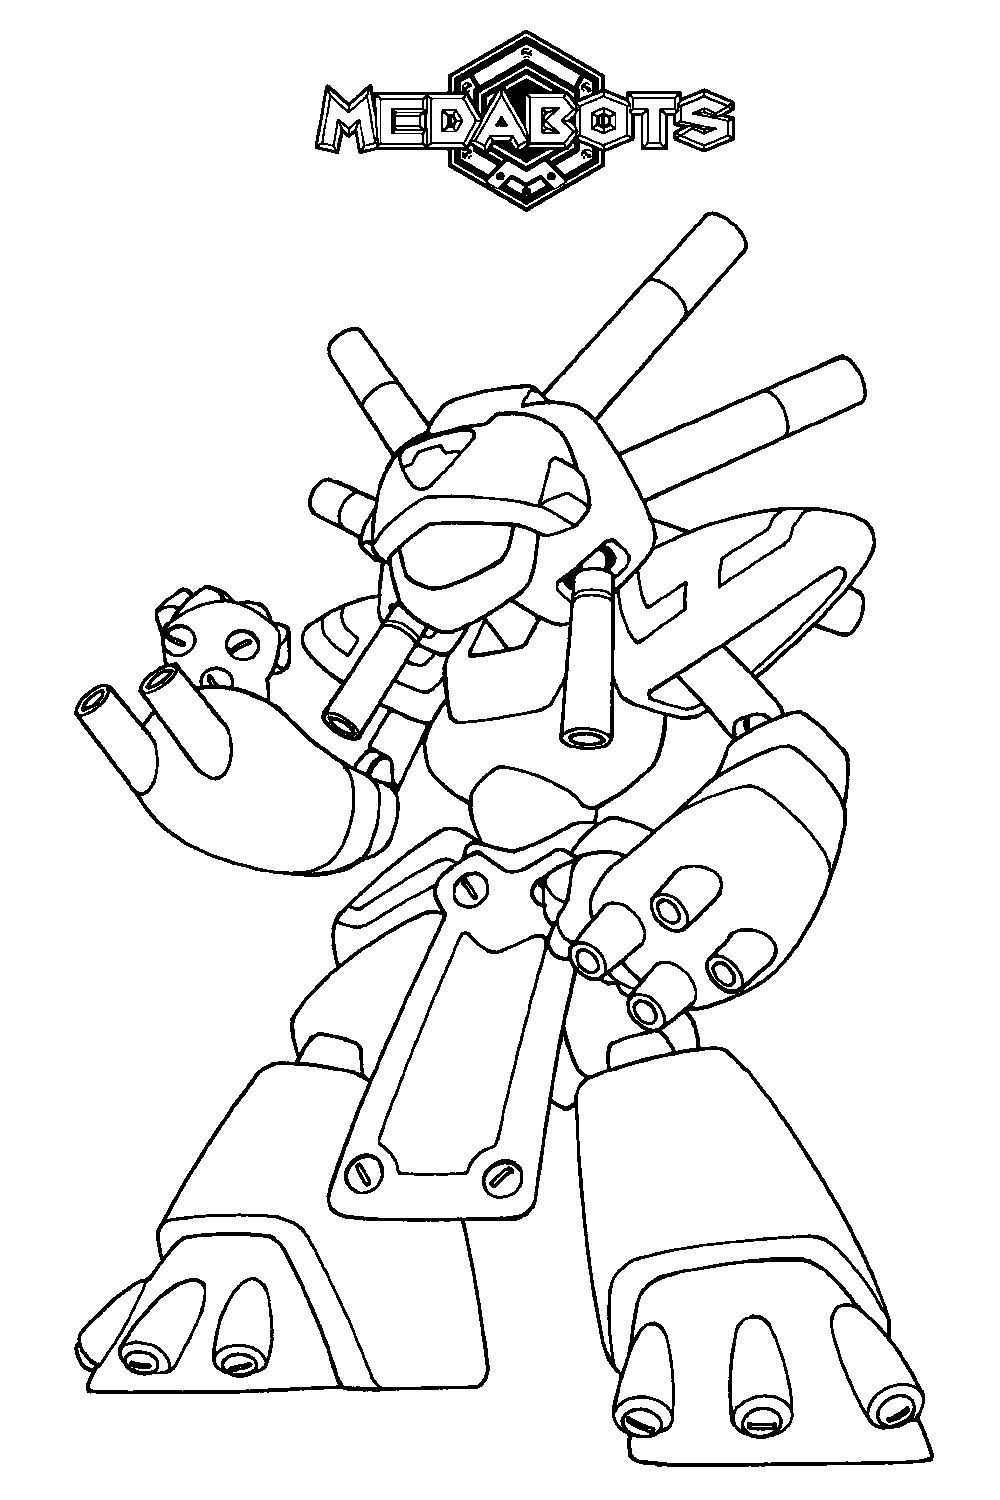 Medabots Coloring Pages TV Film medabots IaHhz Printable 2020 04932 Coloring4free